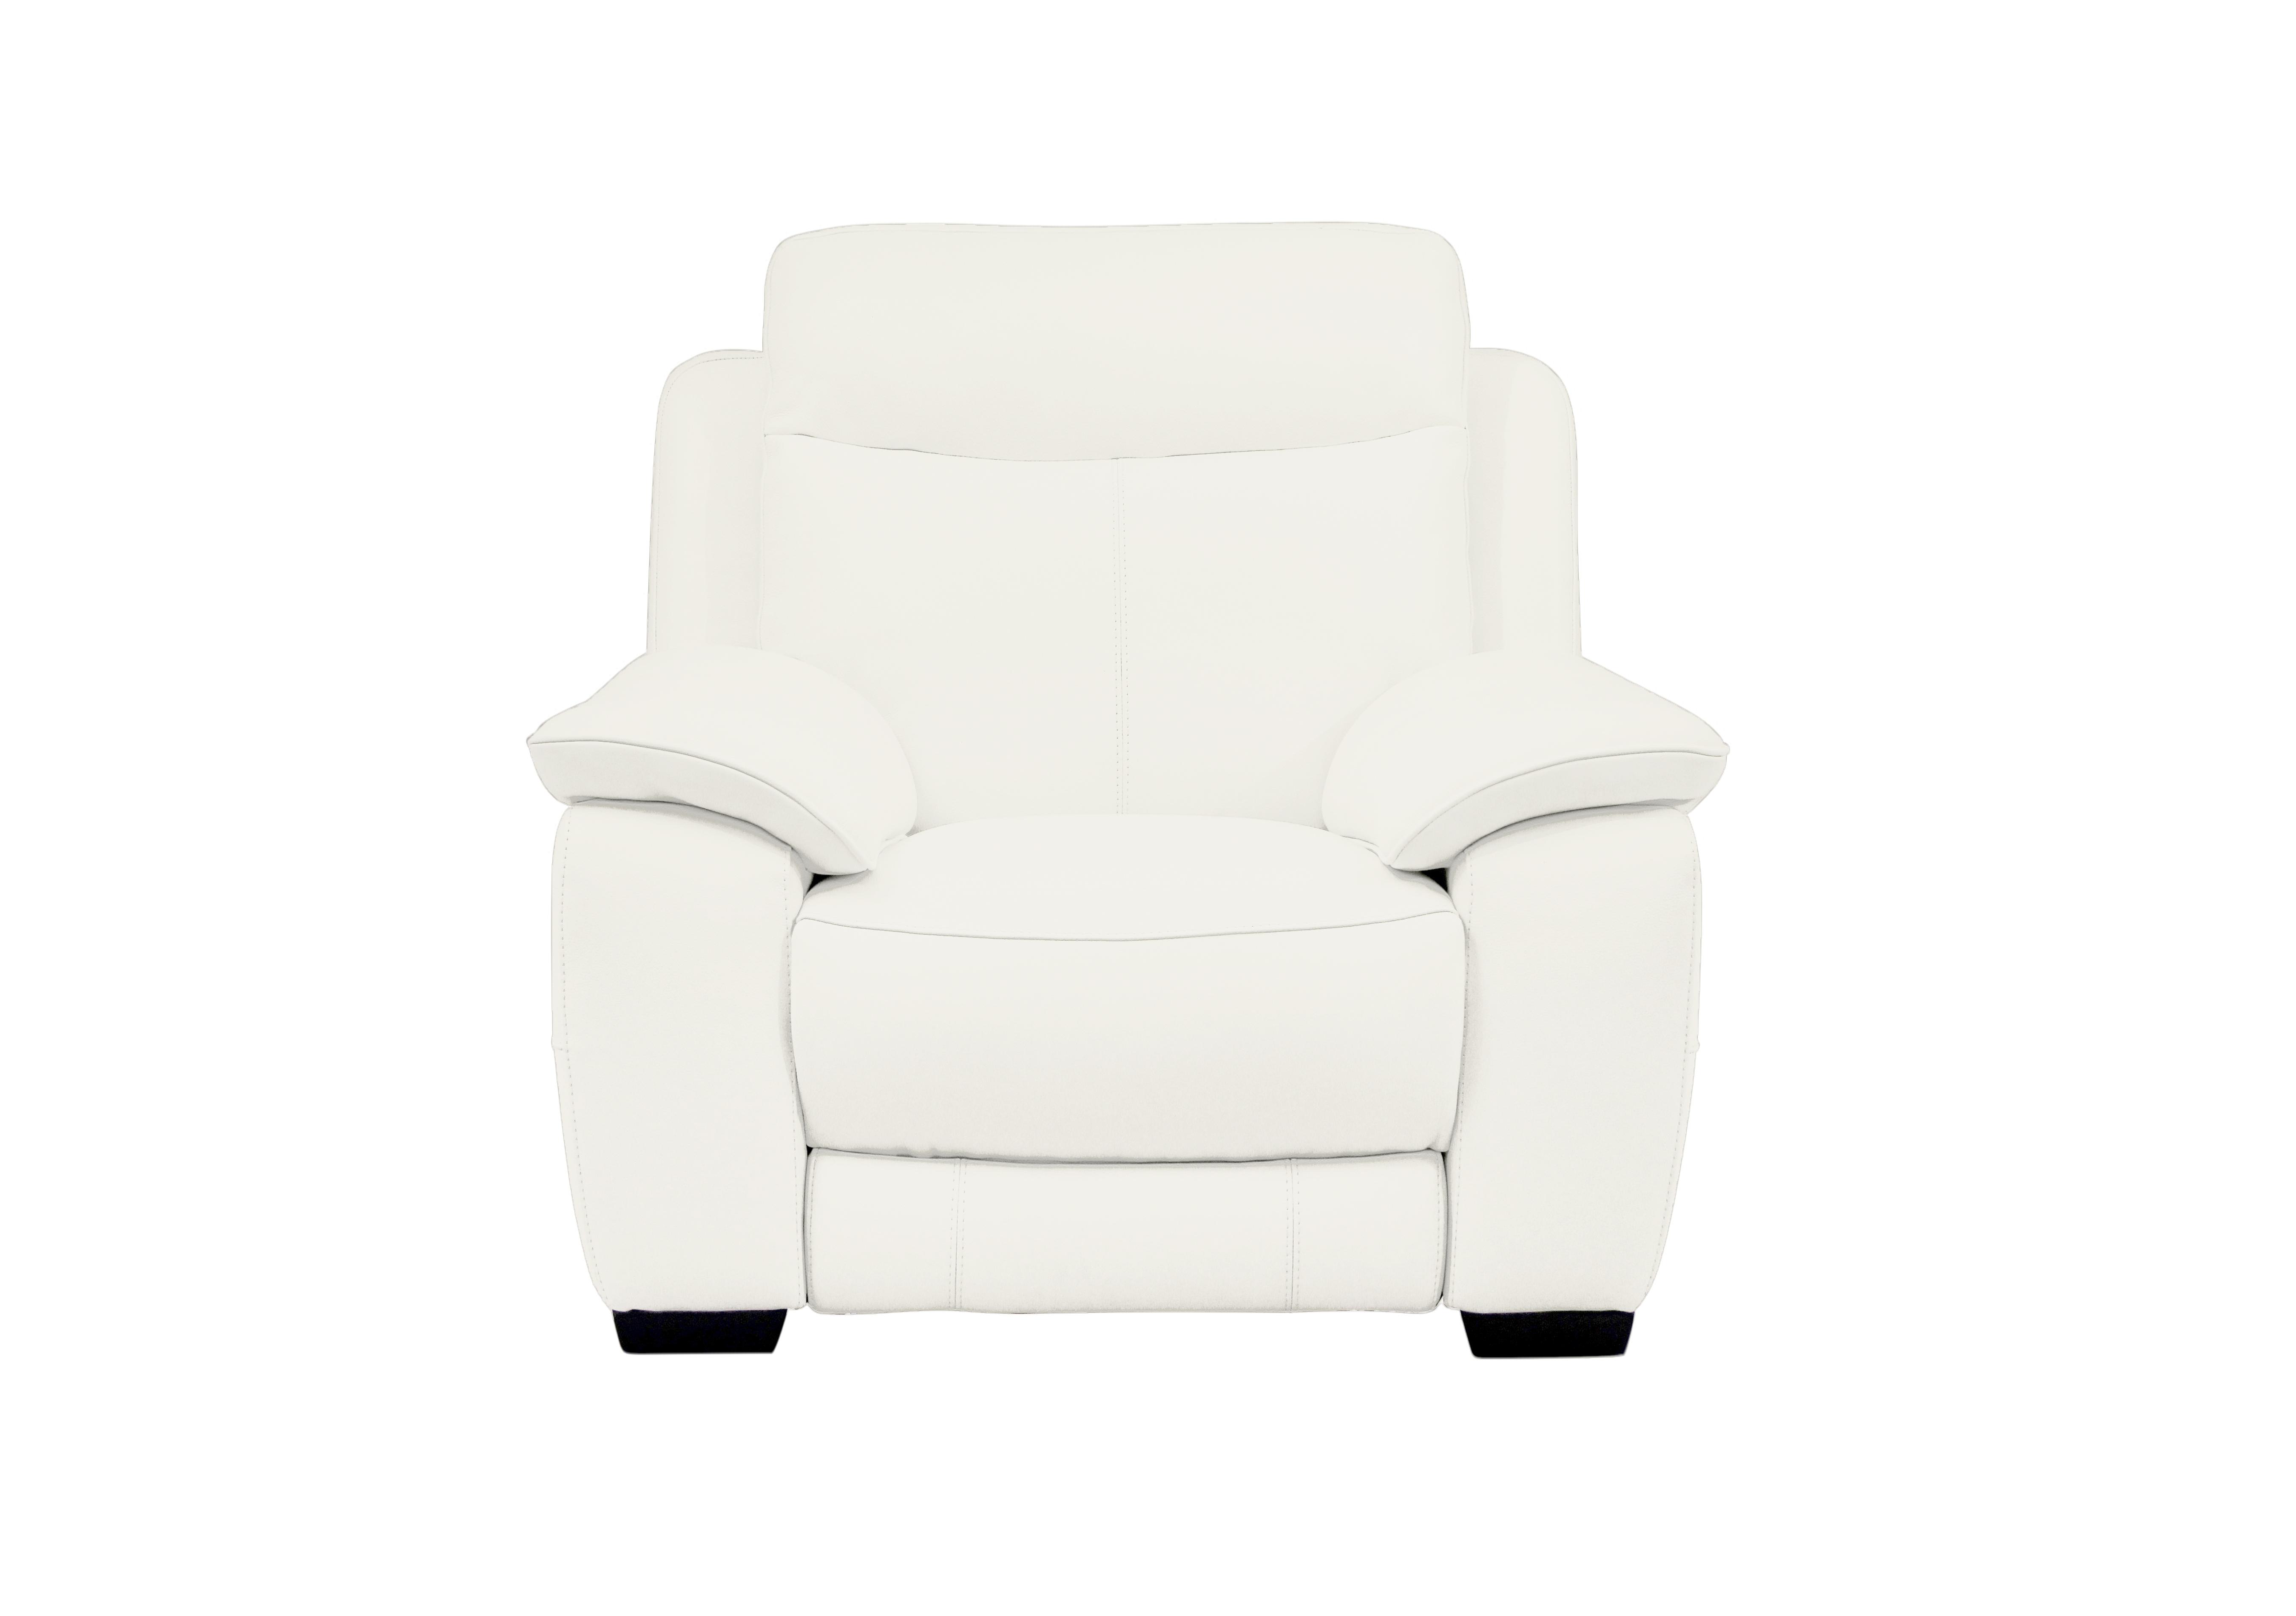 Starlight Express Leather Armchair in Bv-744d Star White on Furniture Village